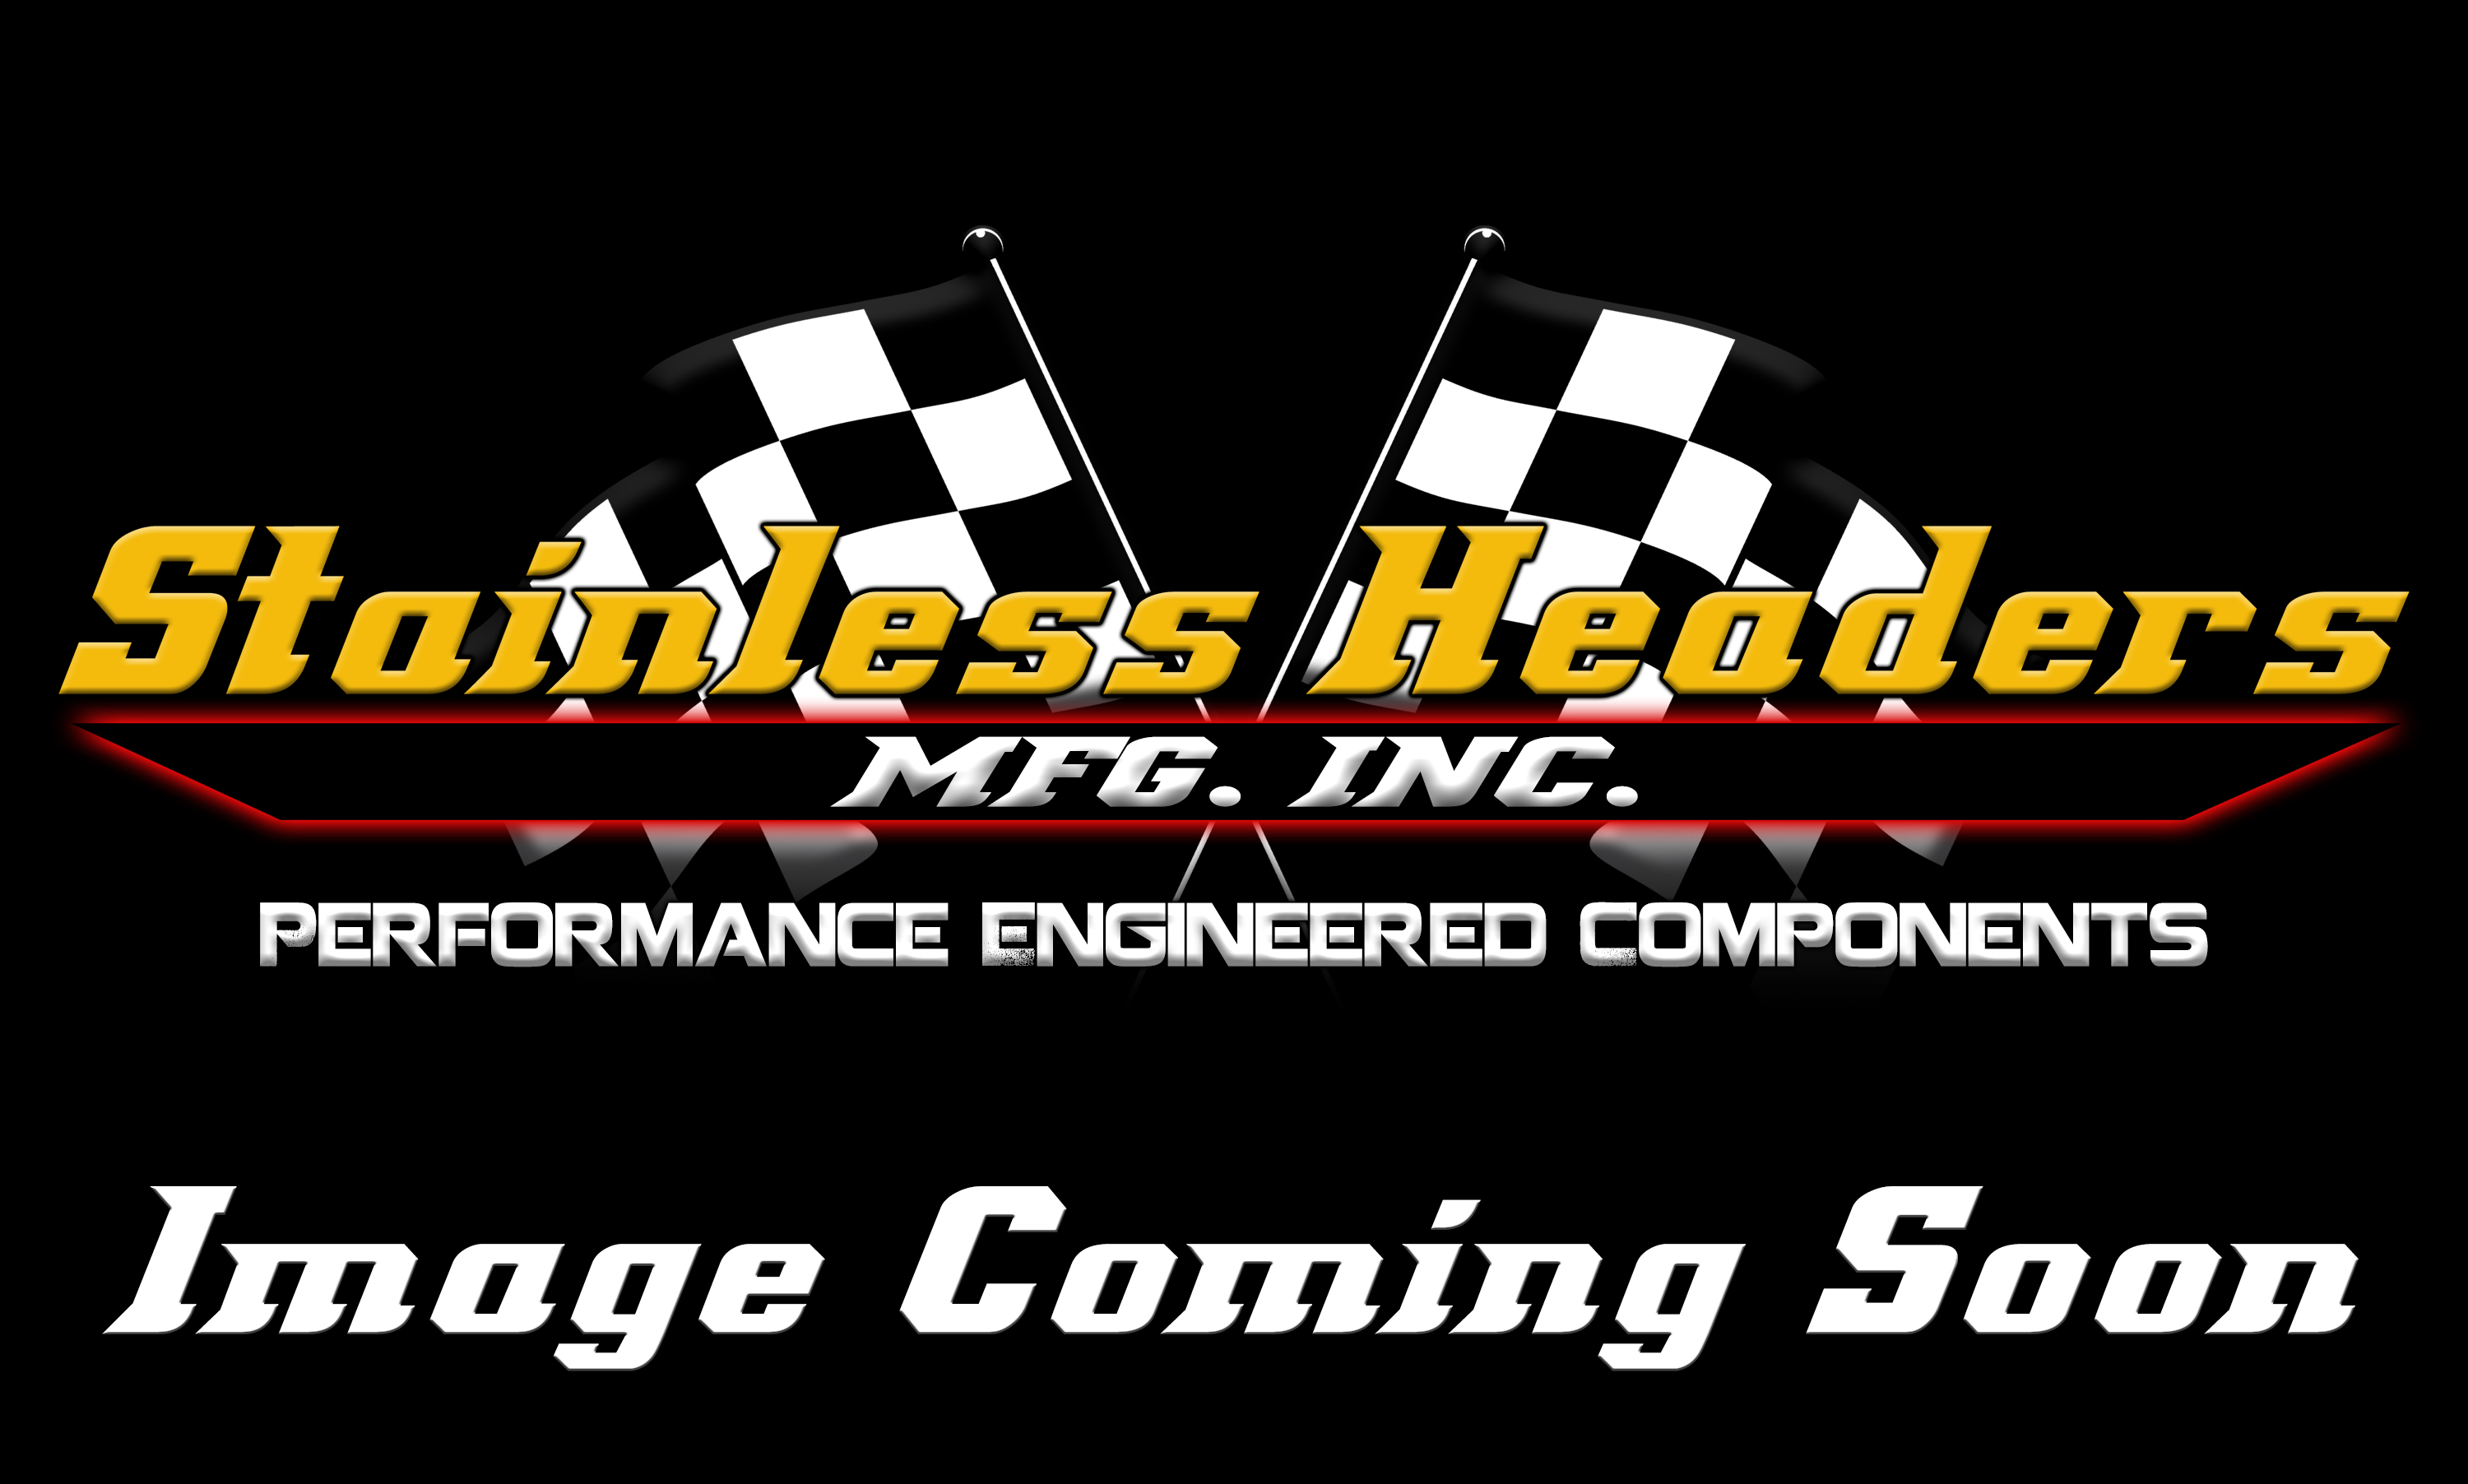 CompTurbo Technologies - CTR4202R-7290 Mid Frame Oil Lubricated 2.0 Turbocharger (1250 HP)